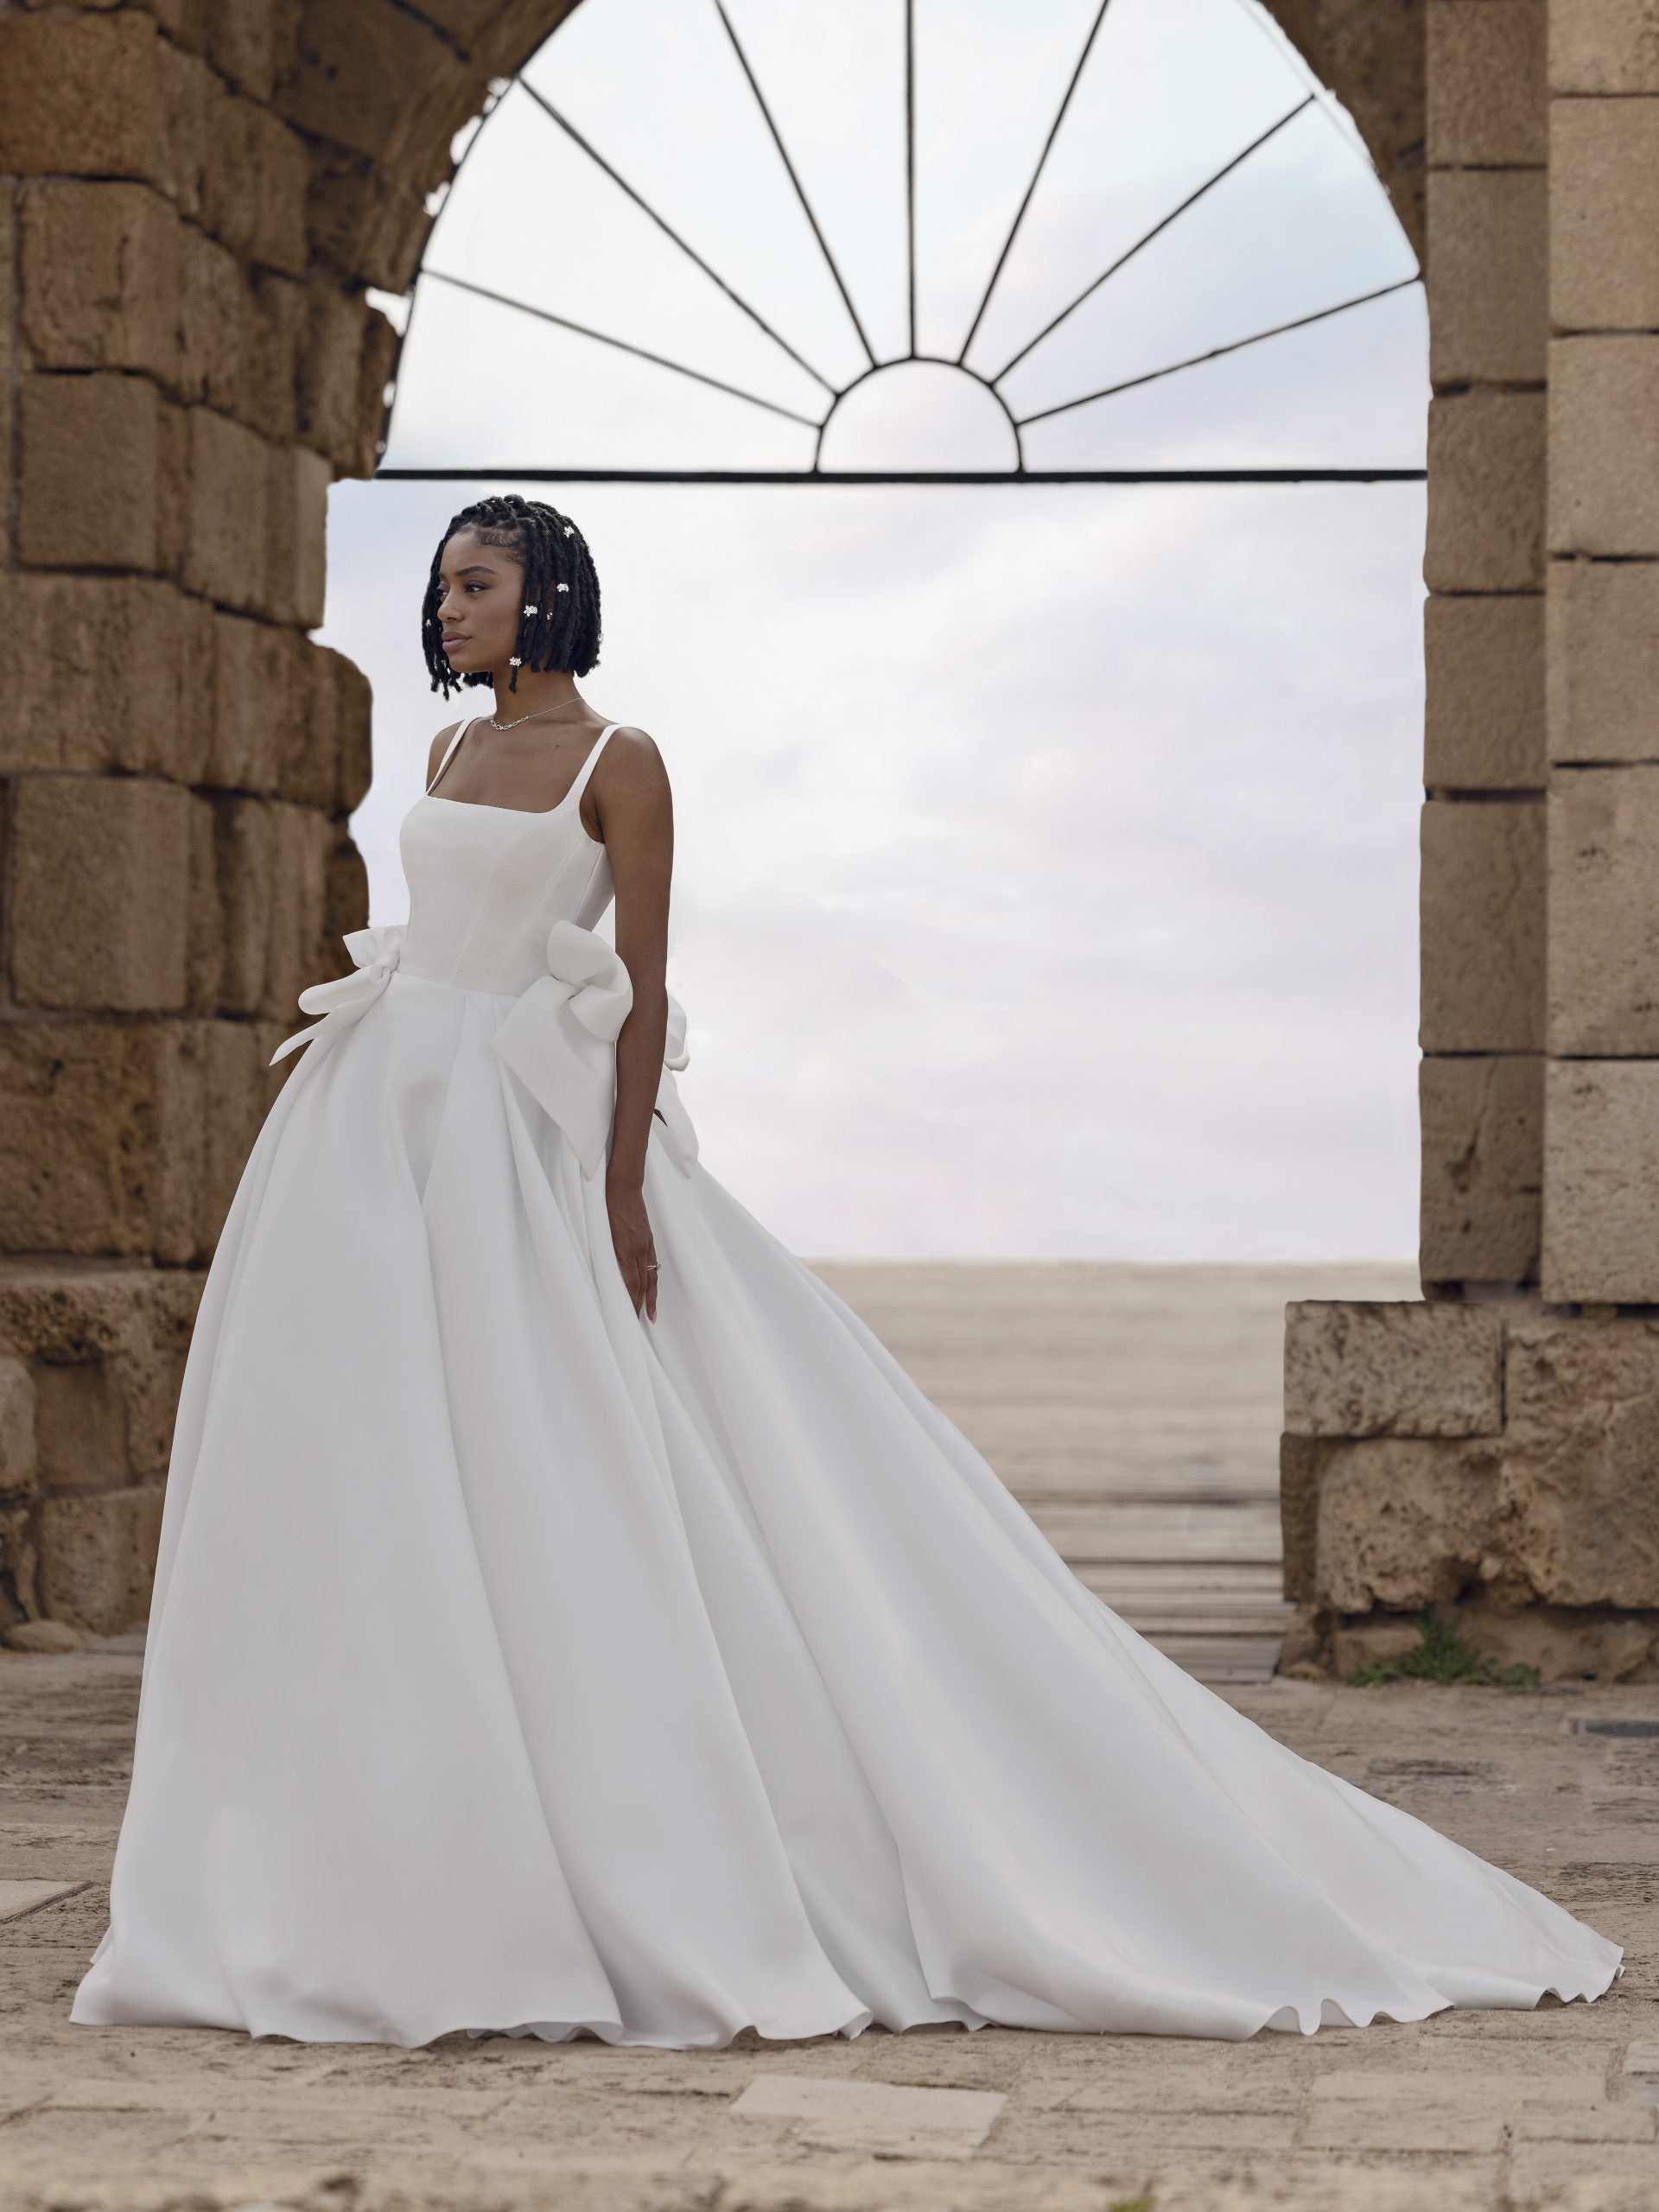 Sleeveless Ball Gown Wedding Dress With Open Back by Love by Pnina Tornai - Image 1